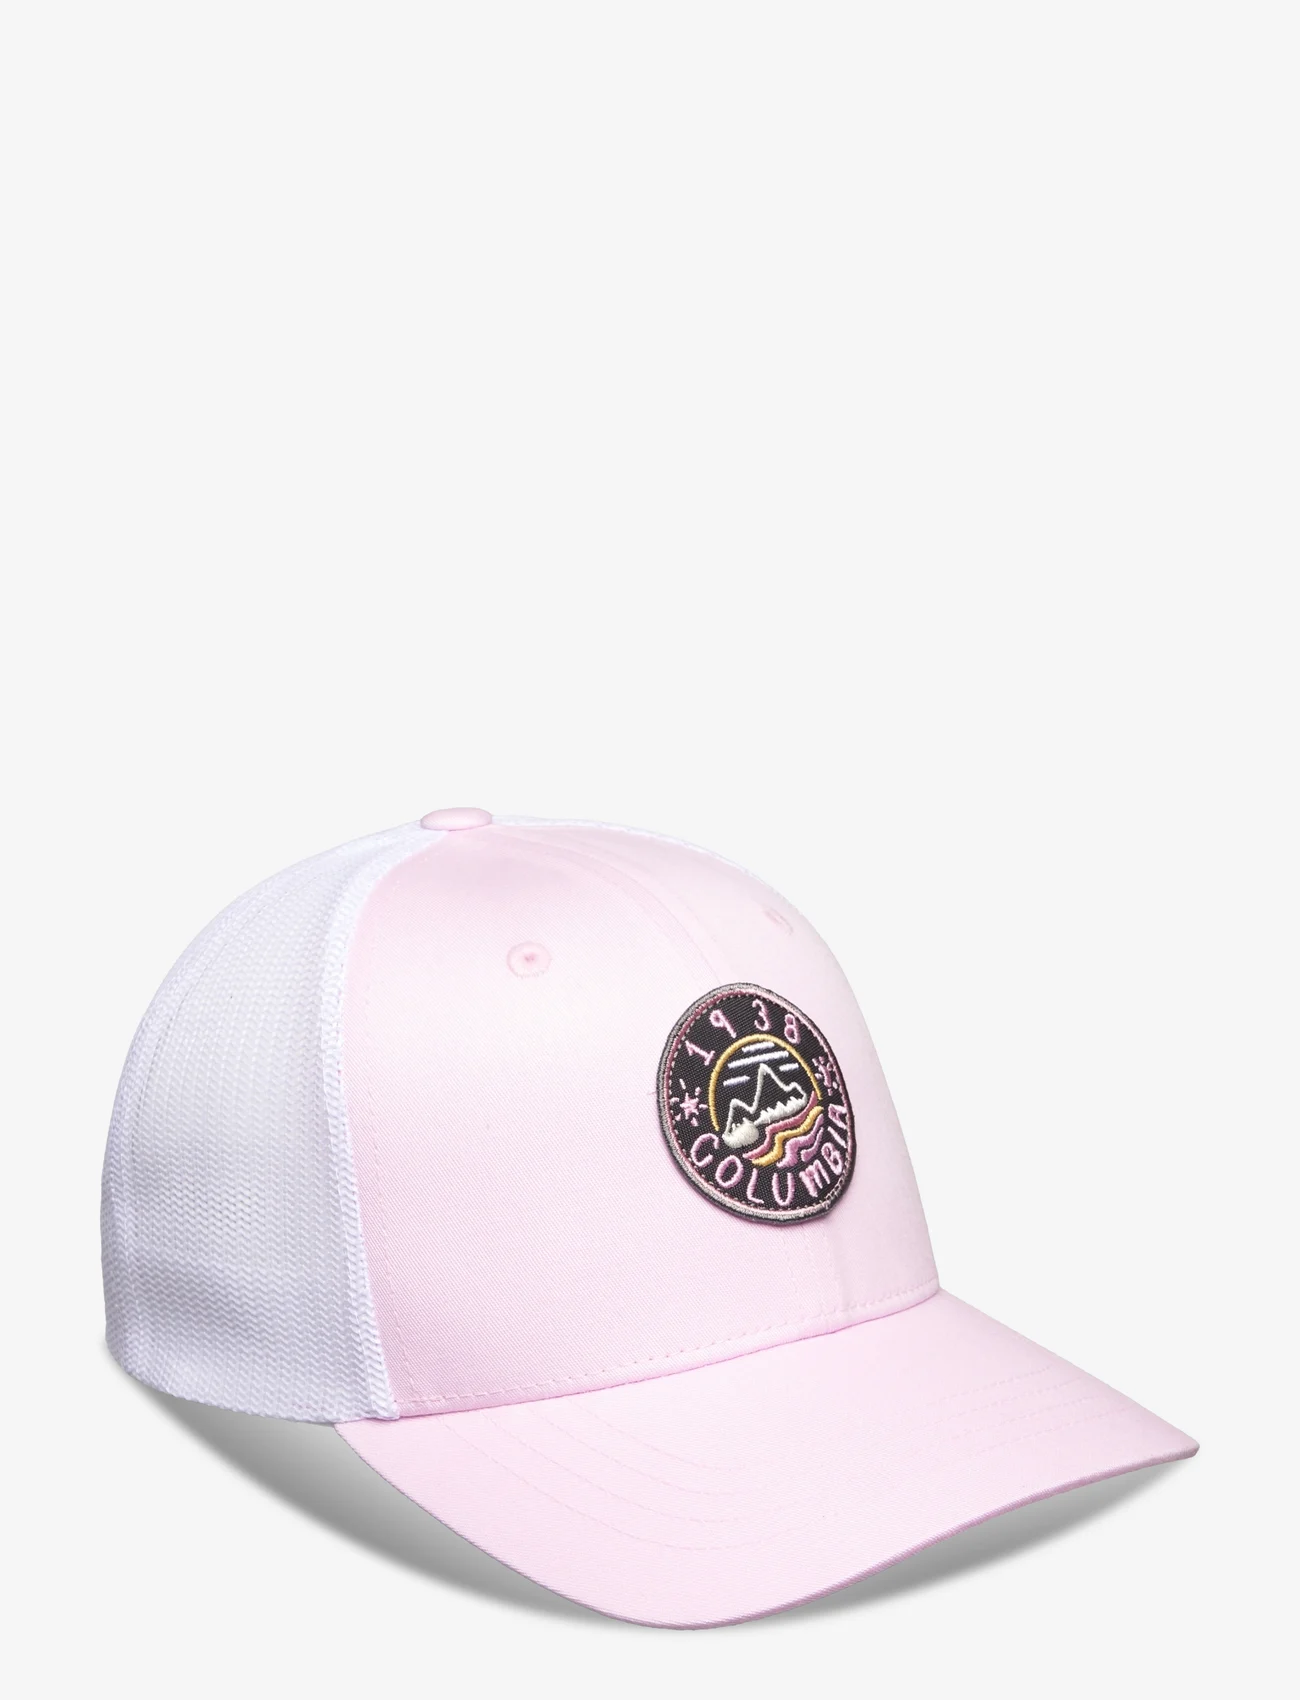 Columbia Sportswear - Columbia Youth Snap Back - sommarfynd - pink dawn, white, hot marker waves - 0